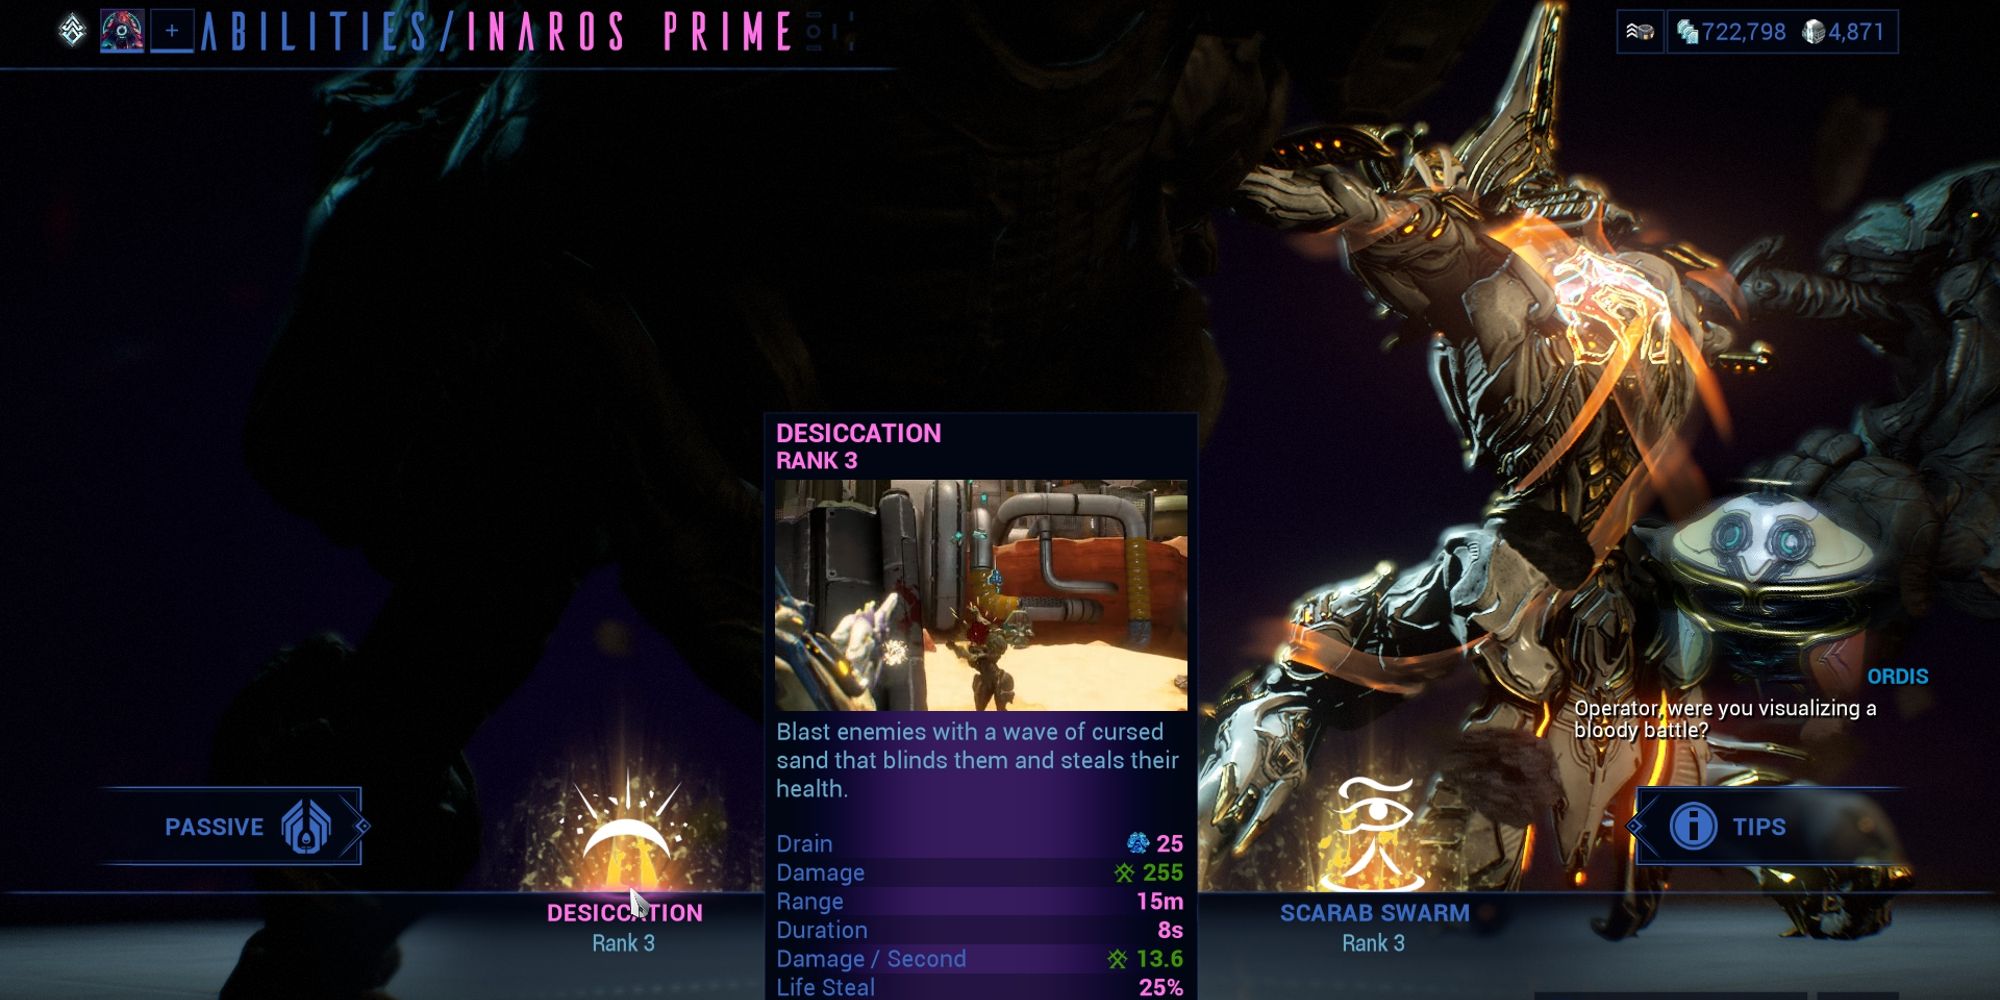 Inaros' first ability, Desiccation